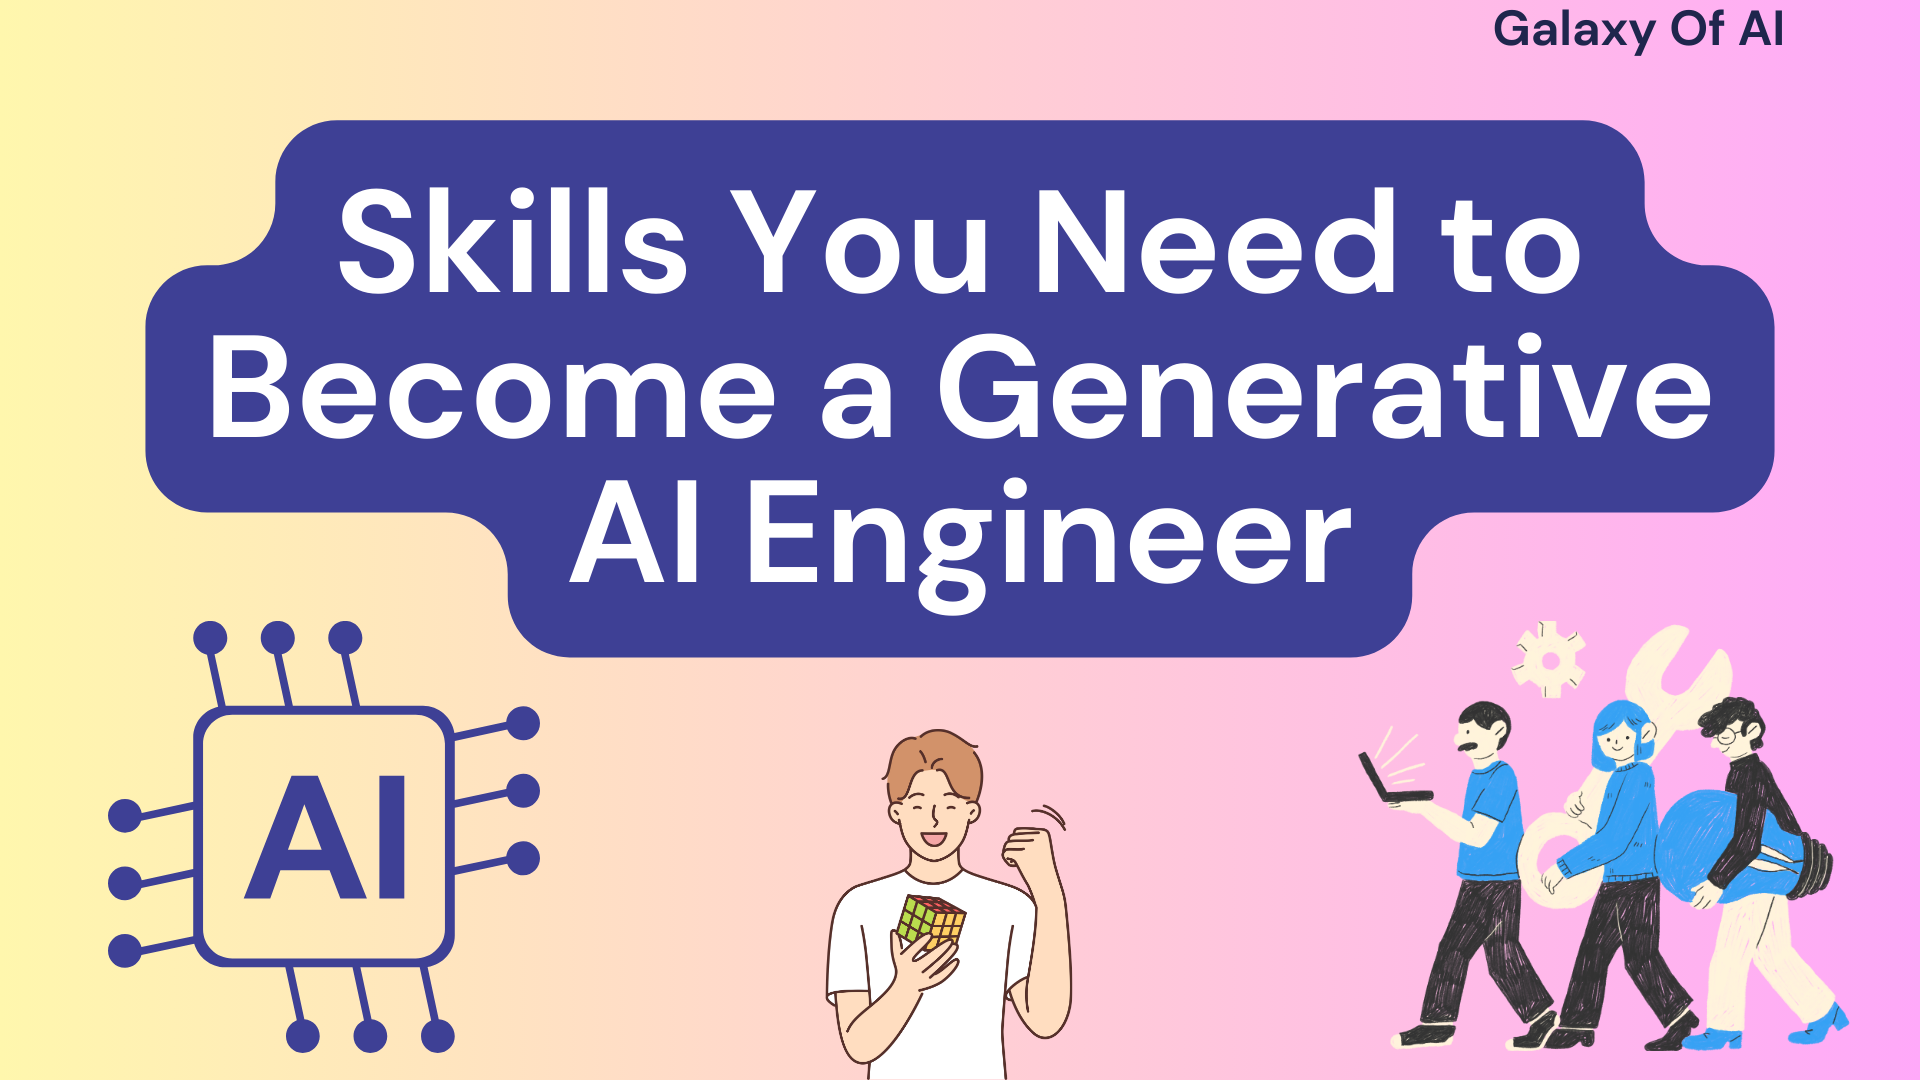 Skills You Need to Become a Generative AI Engineer